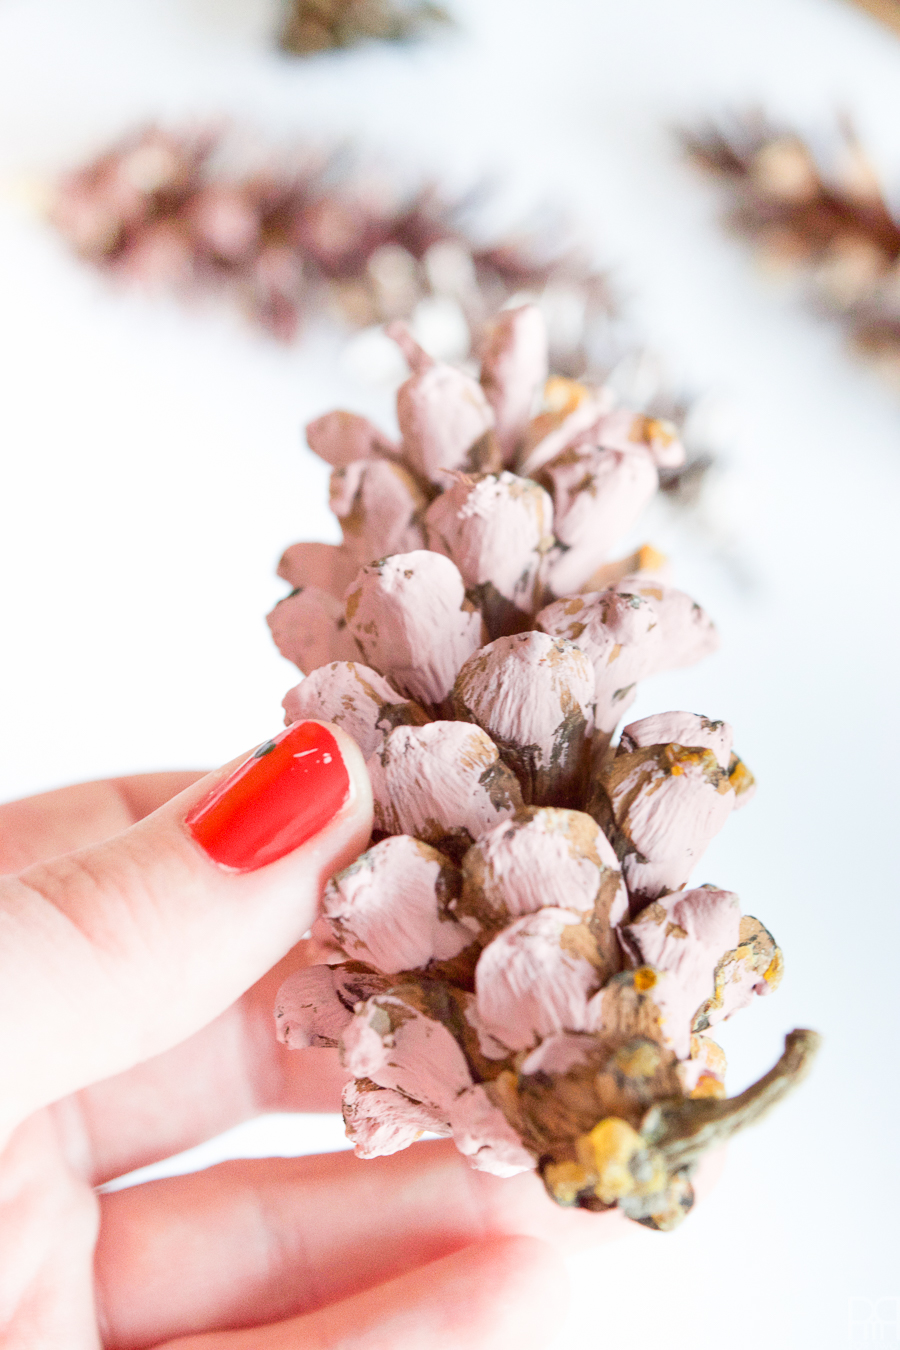 I painted pinecones in beautiful on-trend hues, and gluing them to a wreath - easy as 1-2-3!